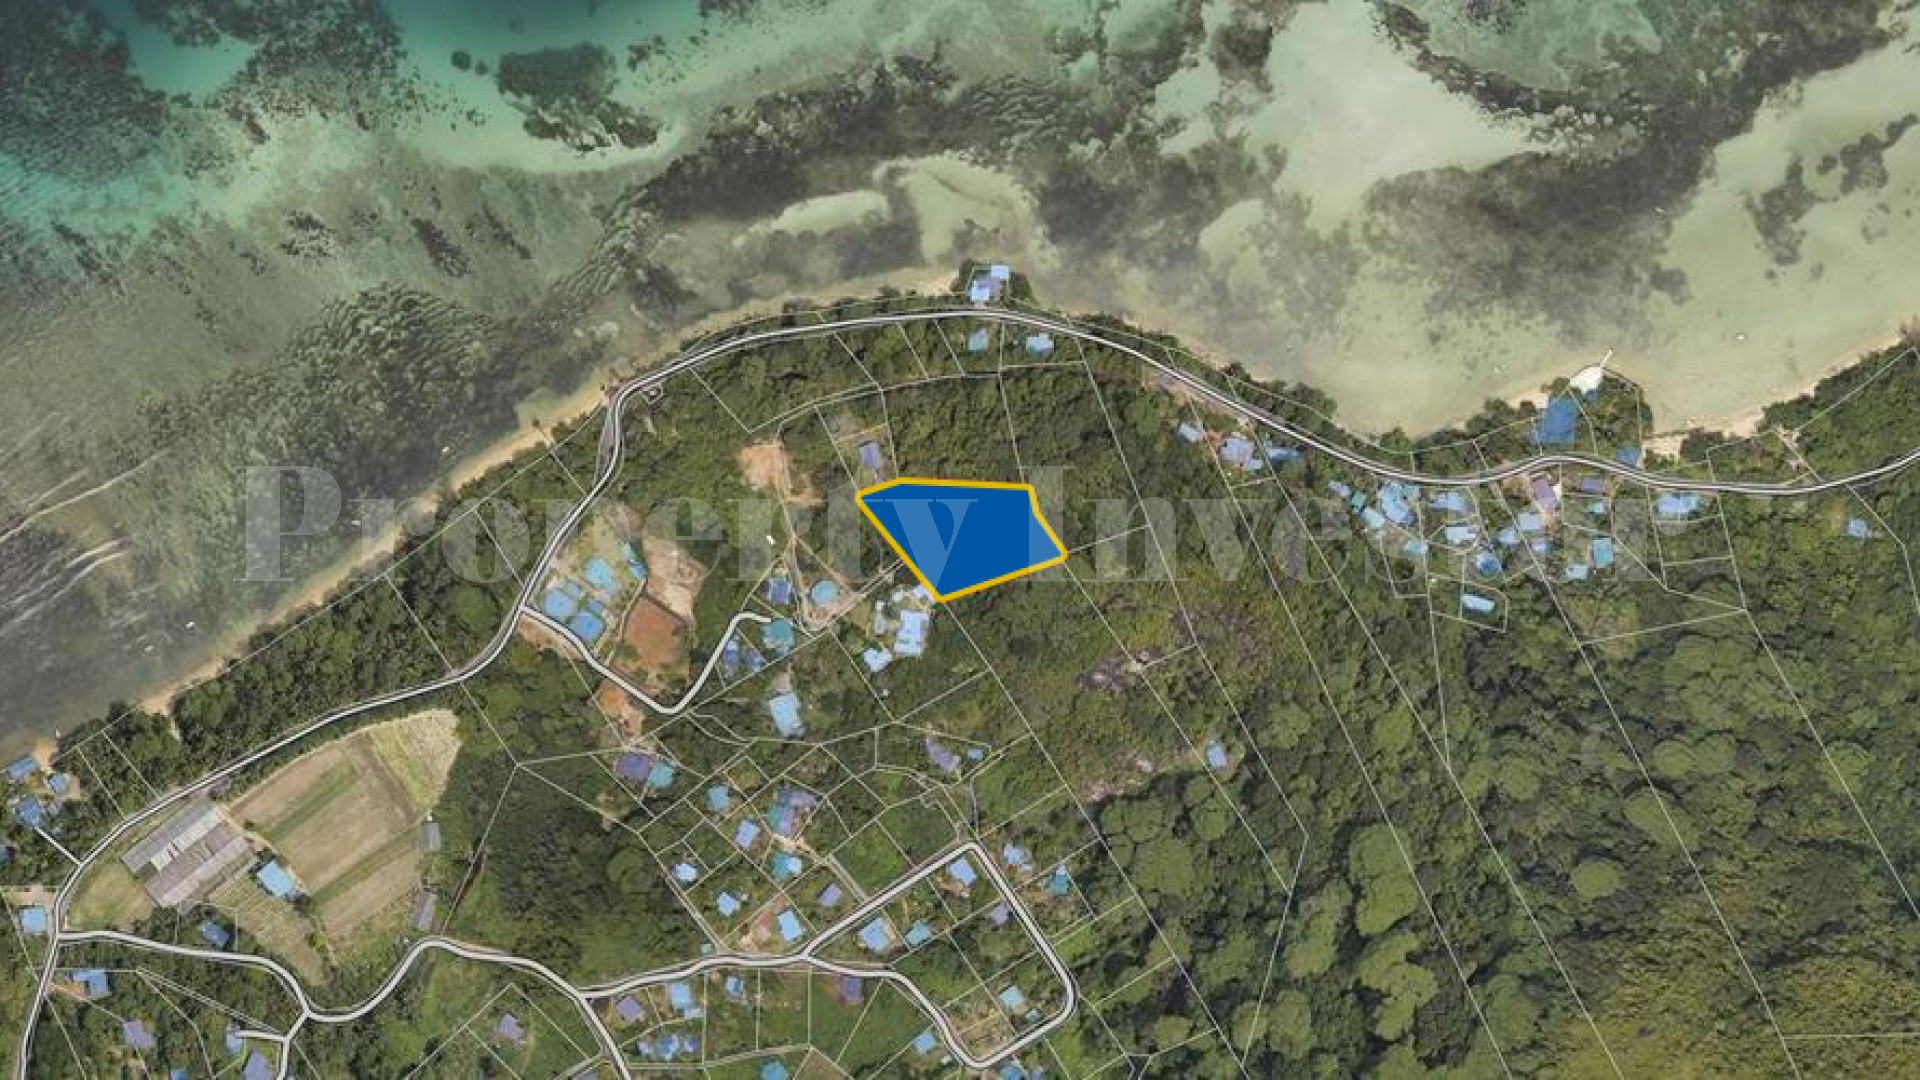 Beautiful 0.45 Hectare Sea View Lot Overlooking Popular Surf Spot in Seychelles